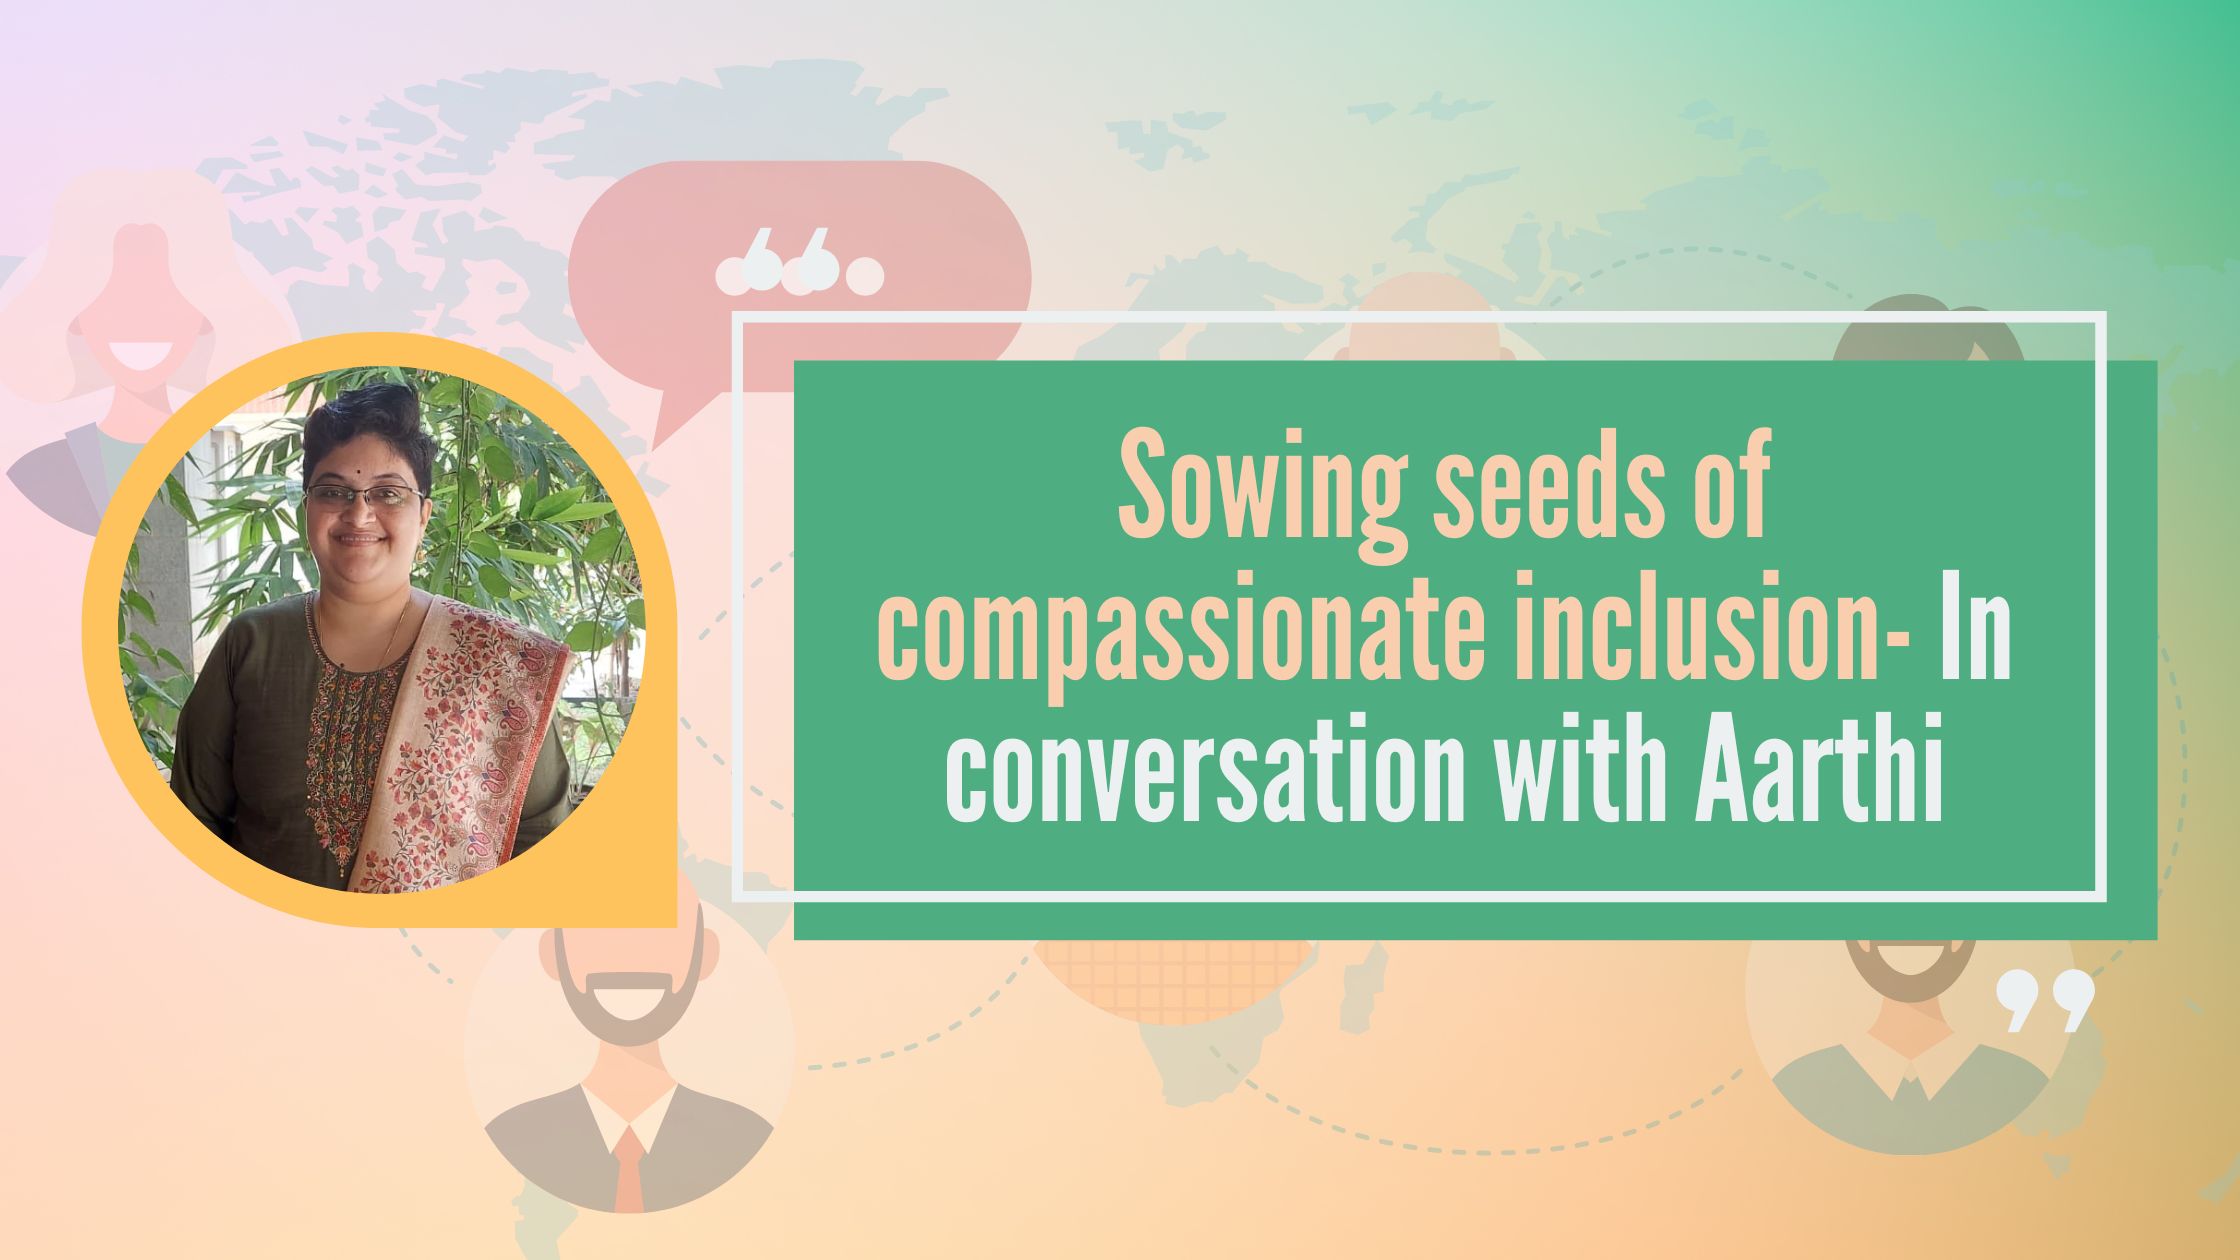 Sowing seeds of compassionate inclusion- In conversation with Aarthi